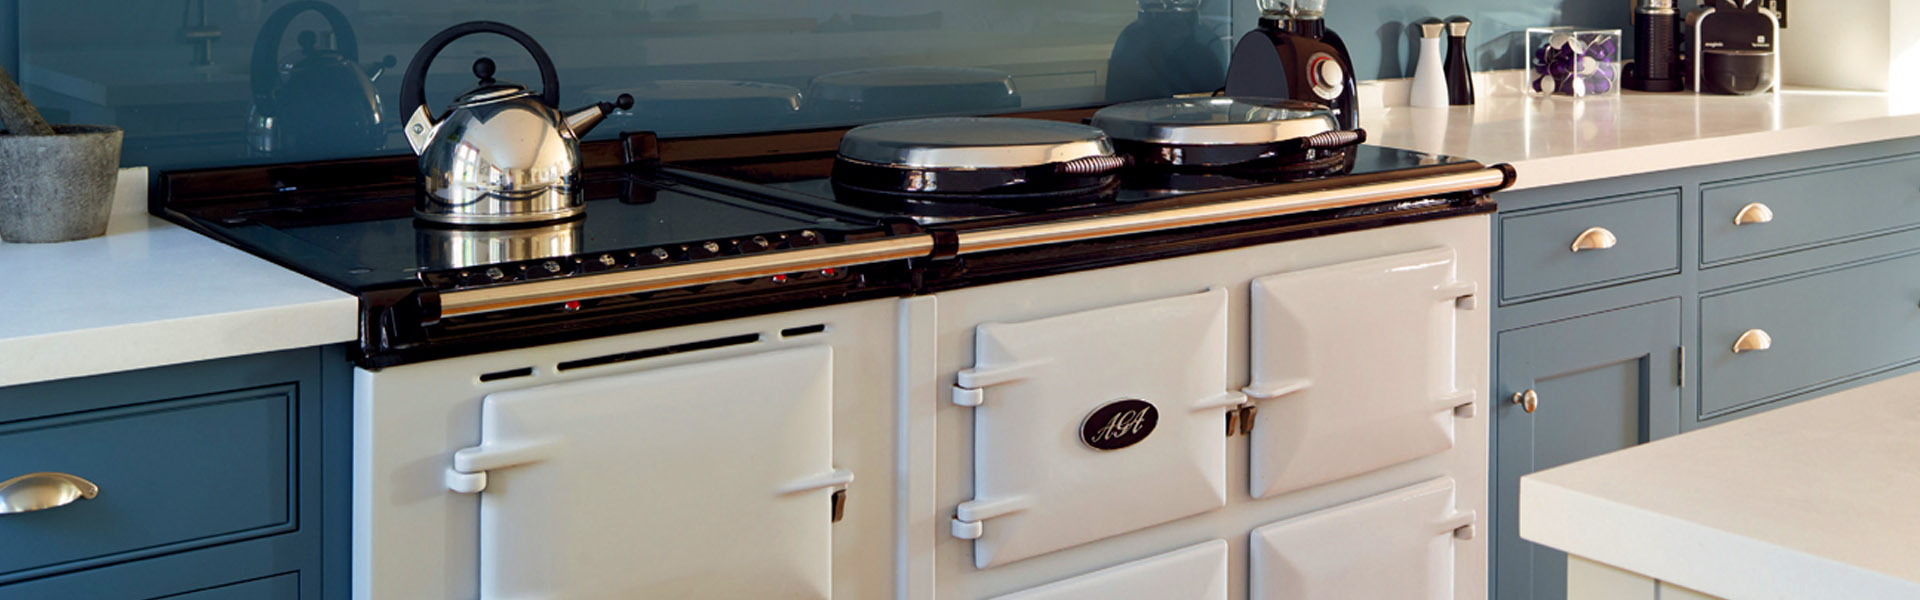 Main Image for Aga Cooker Servicing Page